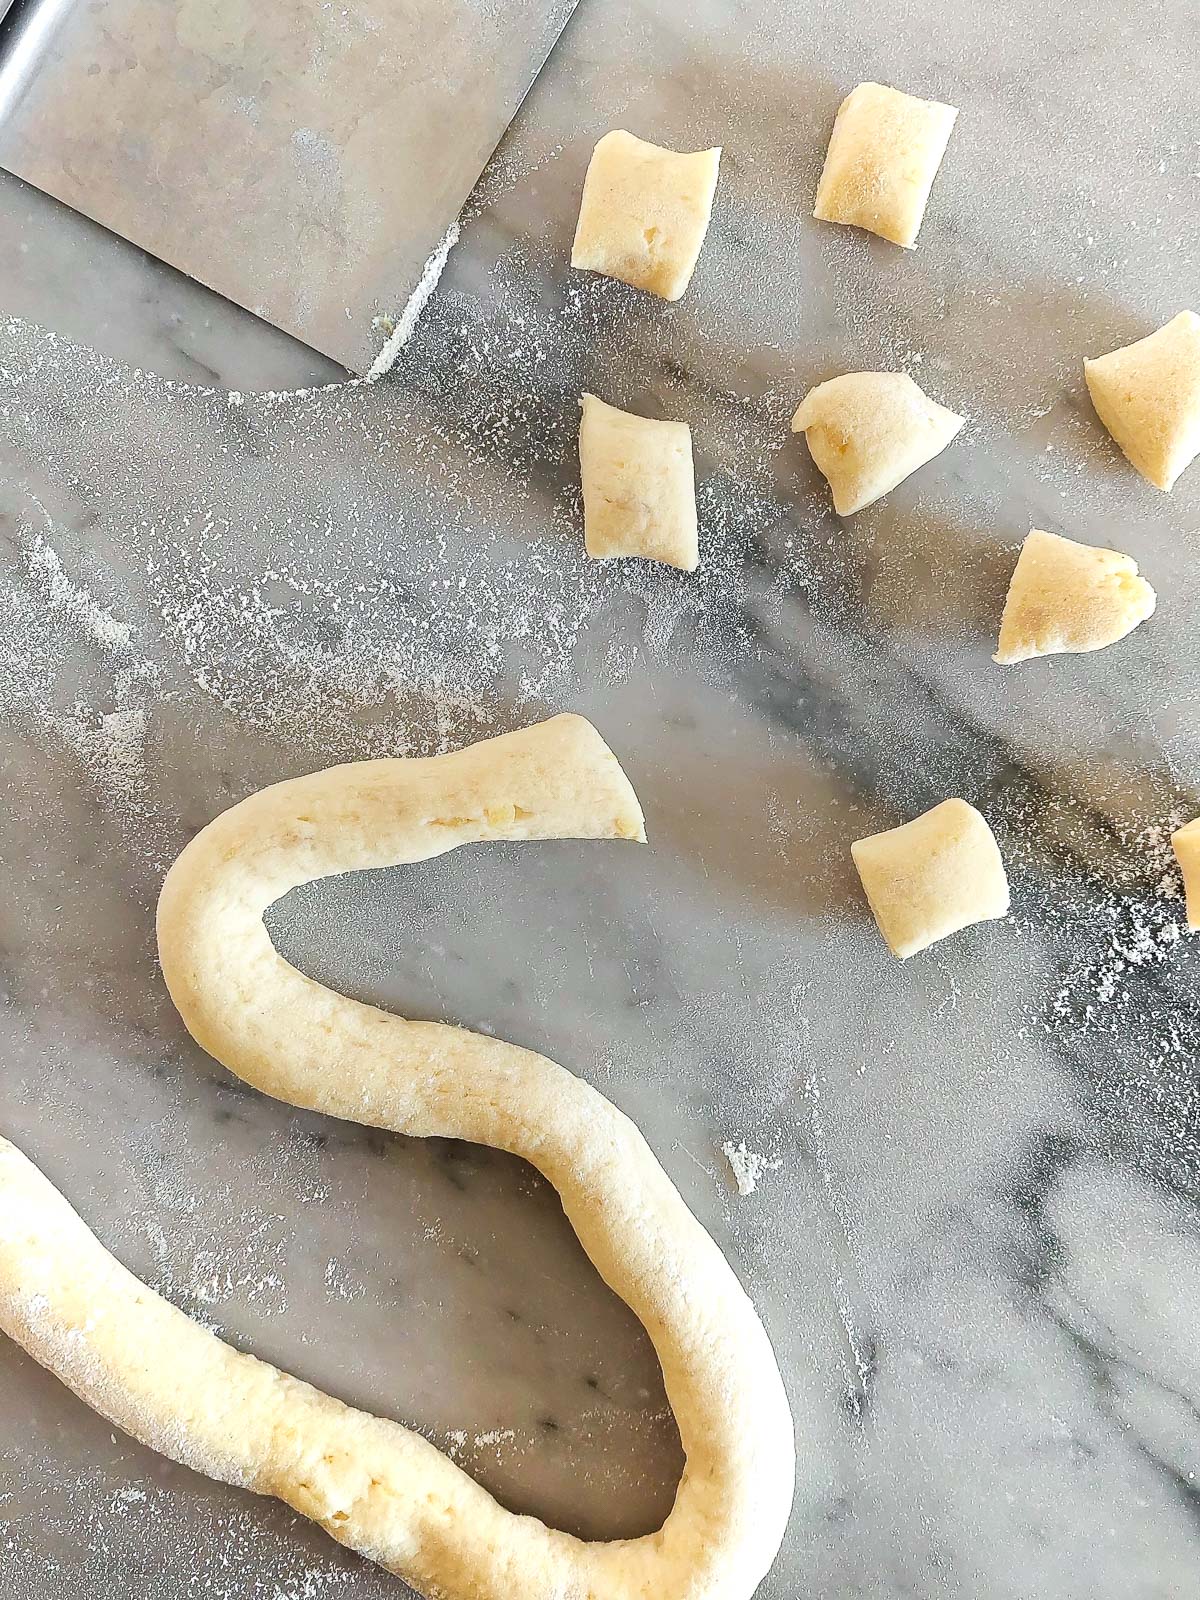 gnocchi dough rolled by hand